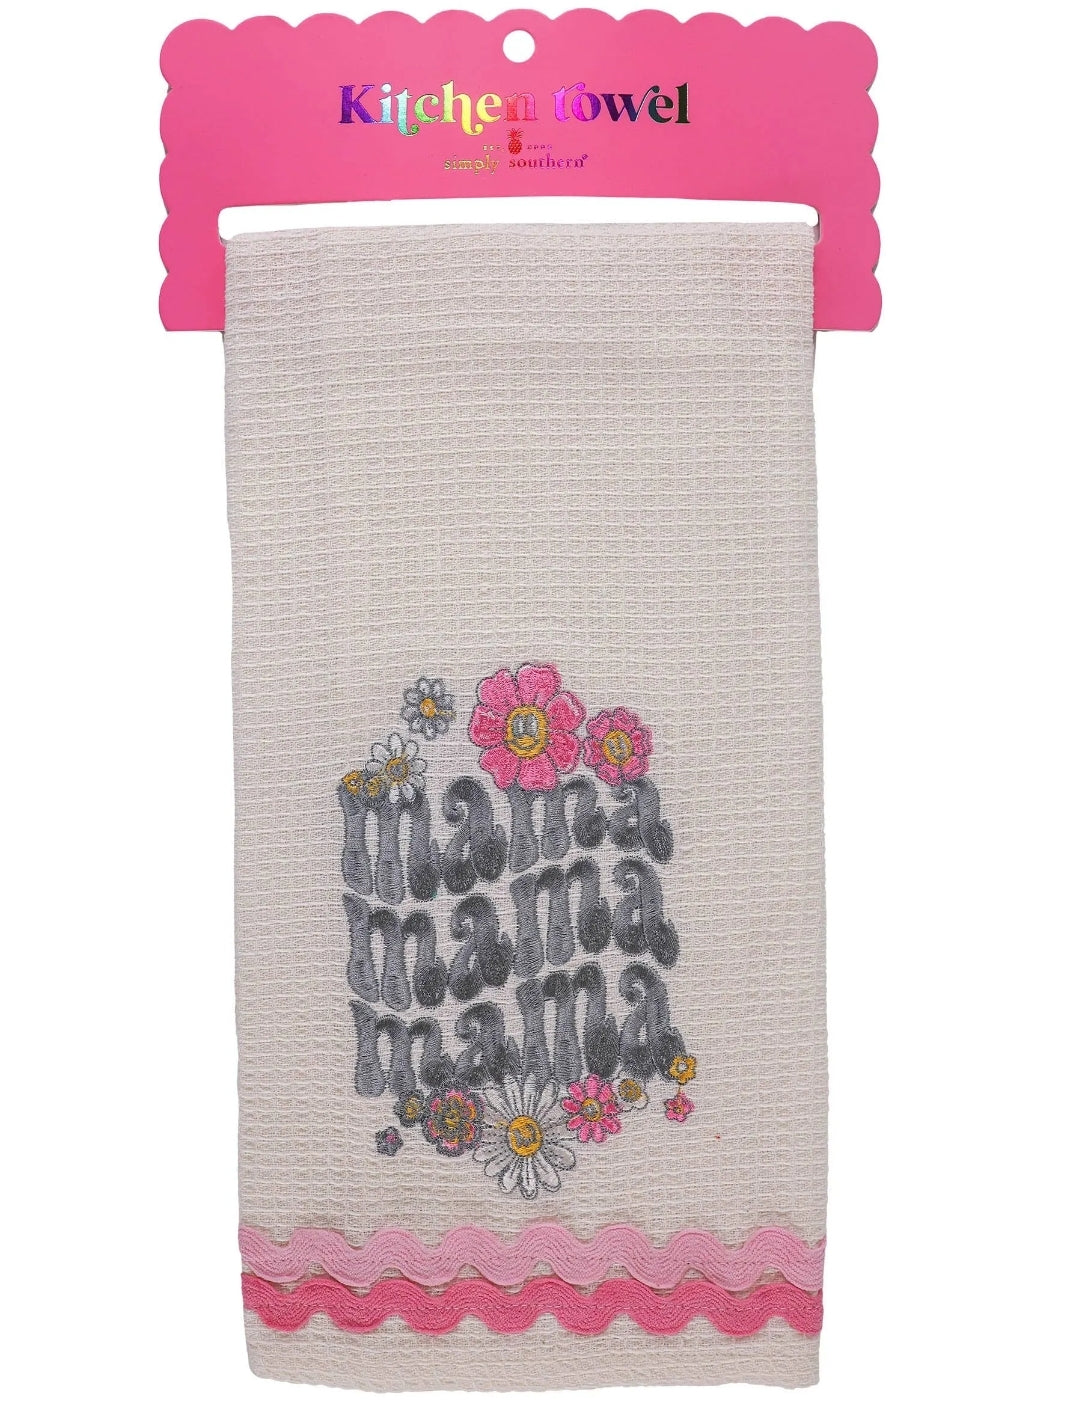 Simply Southern kitchen towel- mama